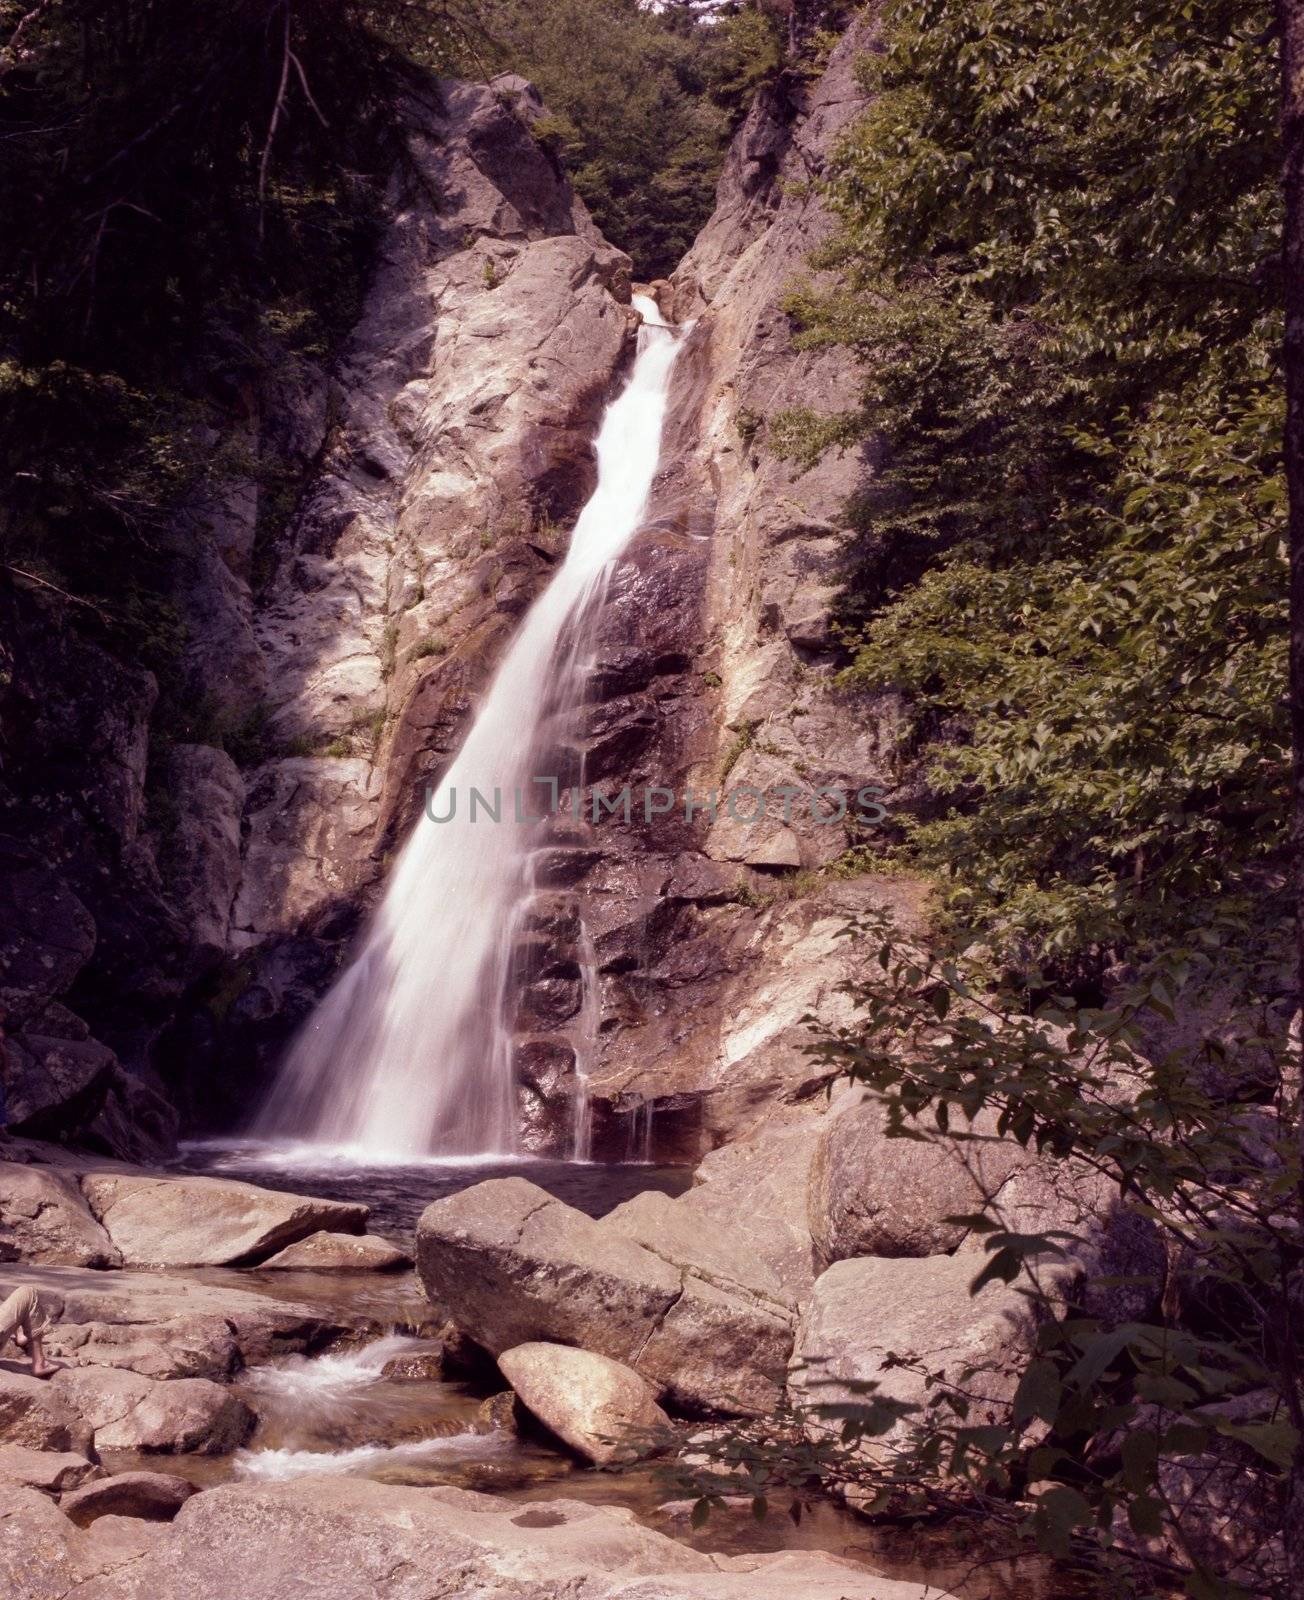 Image of a high falls on the Cabot Trail in Nova Scotia, Canada